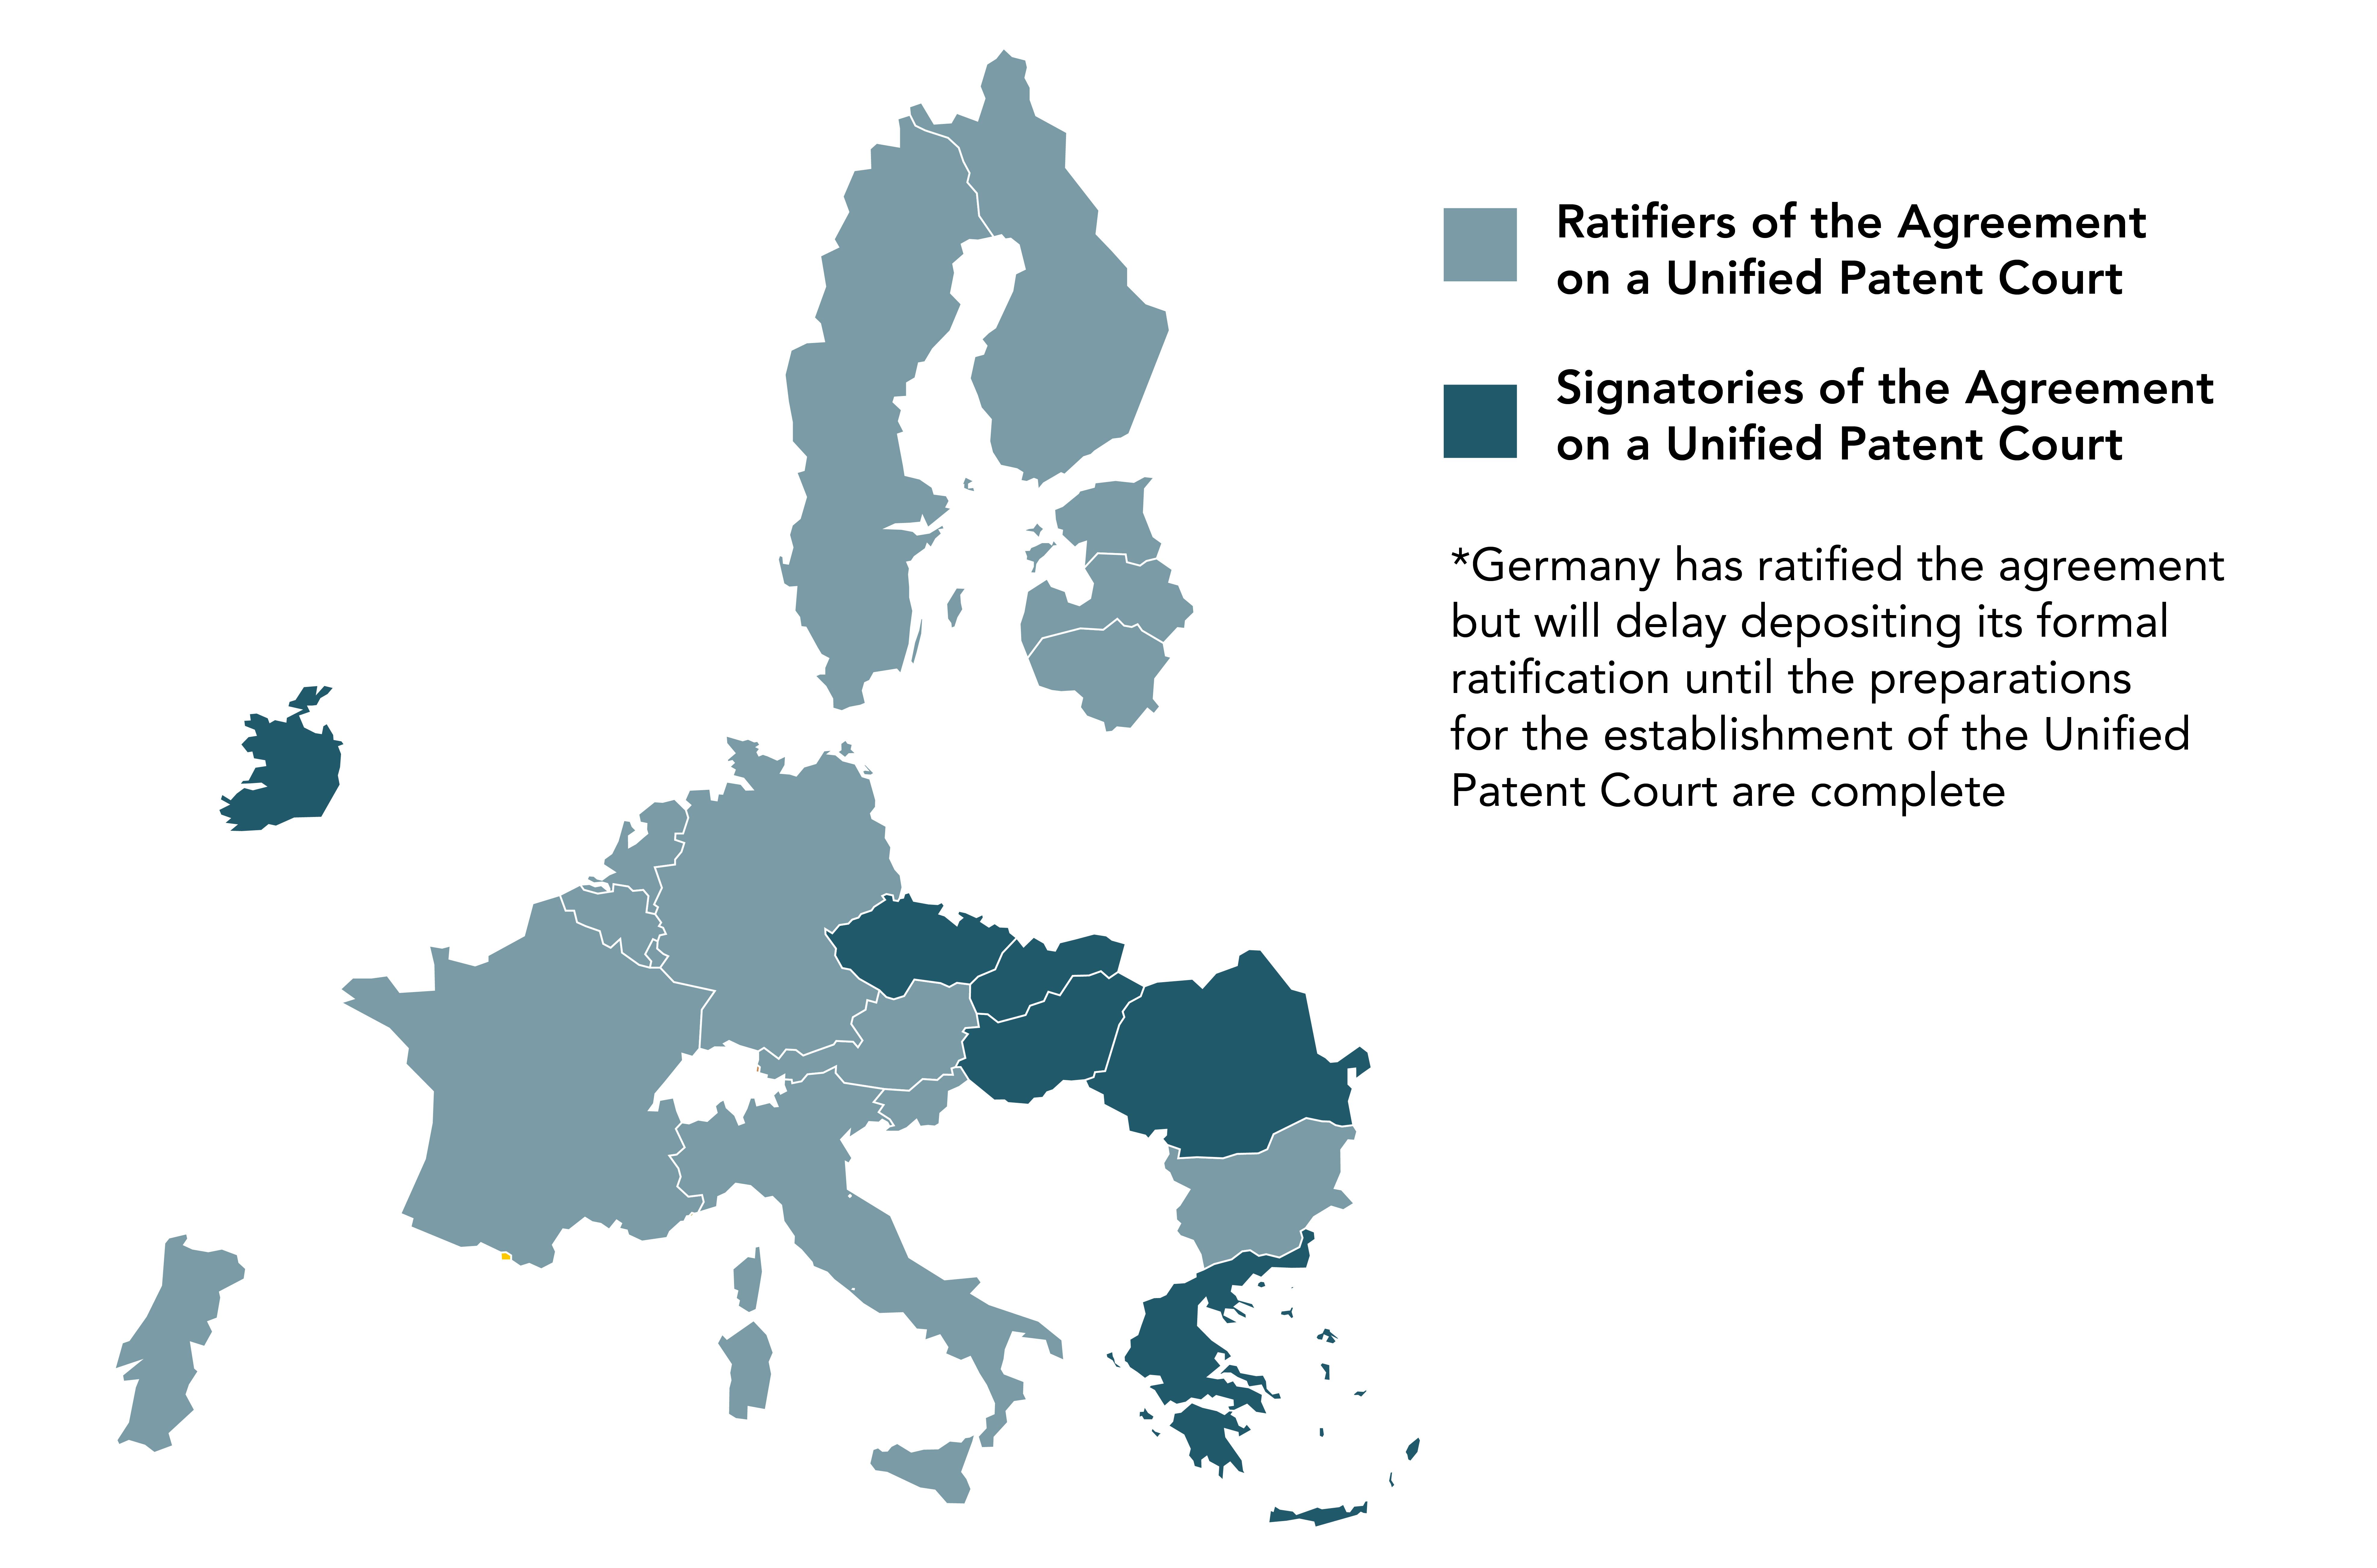 Map of countries that will be involved with the Unified Patent Court